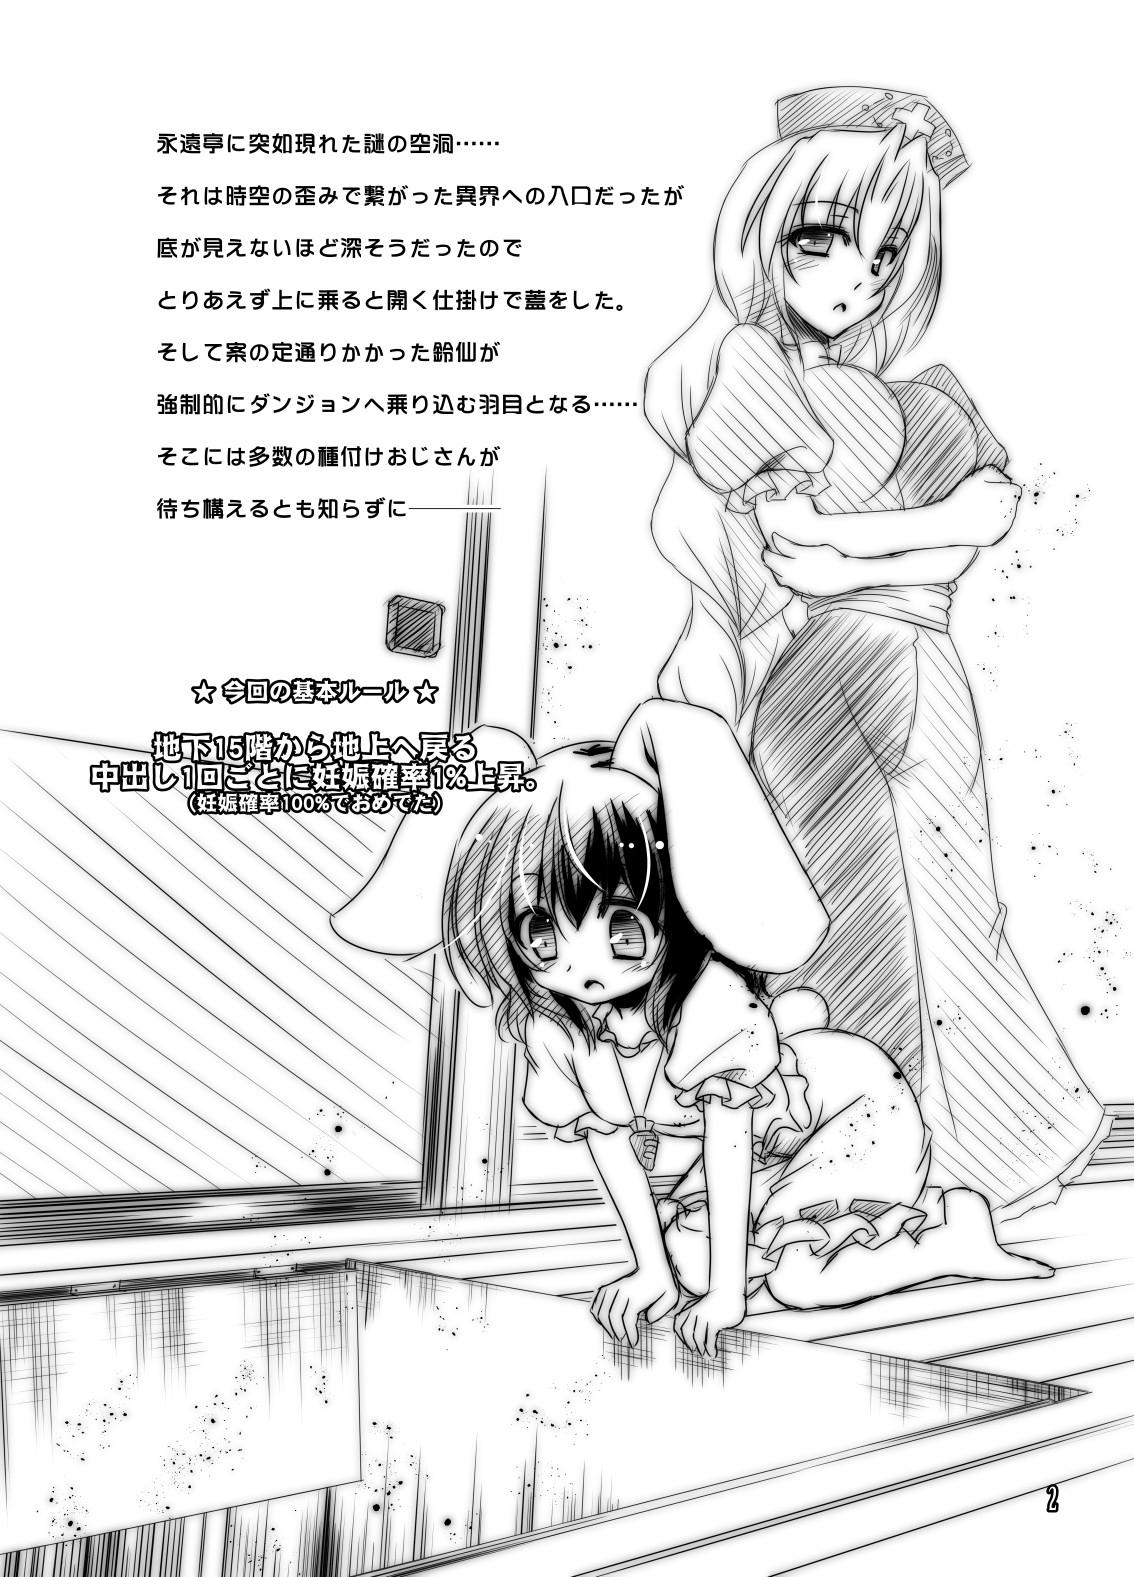 Pussy Udonge vs Tanetsuke Oji-san Dungeon - Touhou project Trans - Page 2